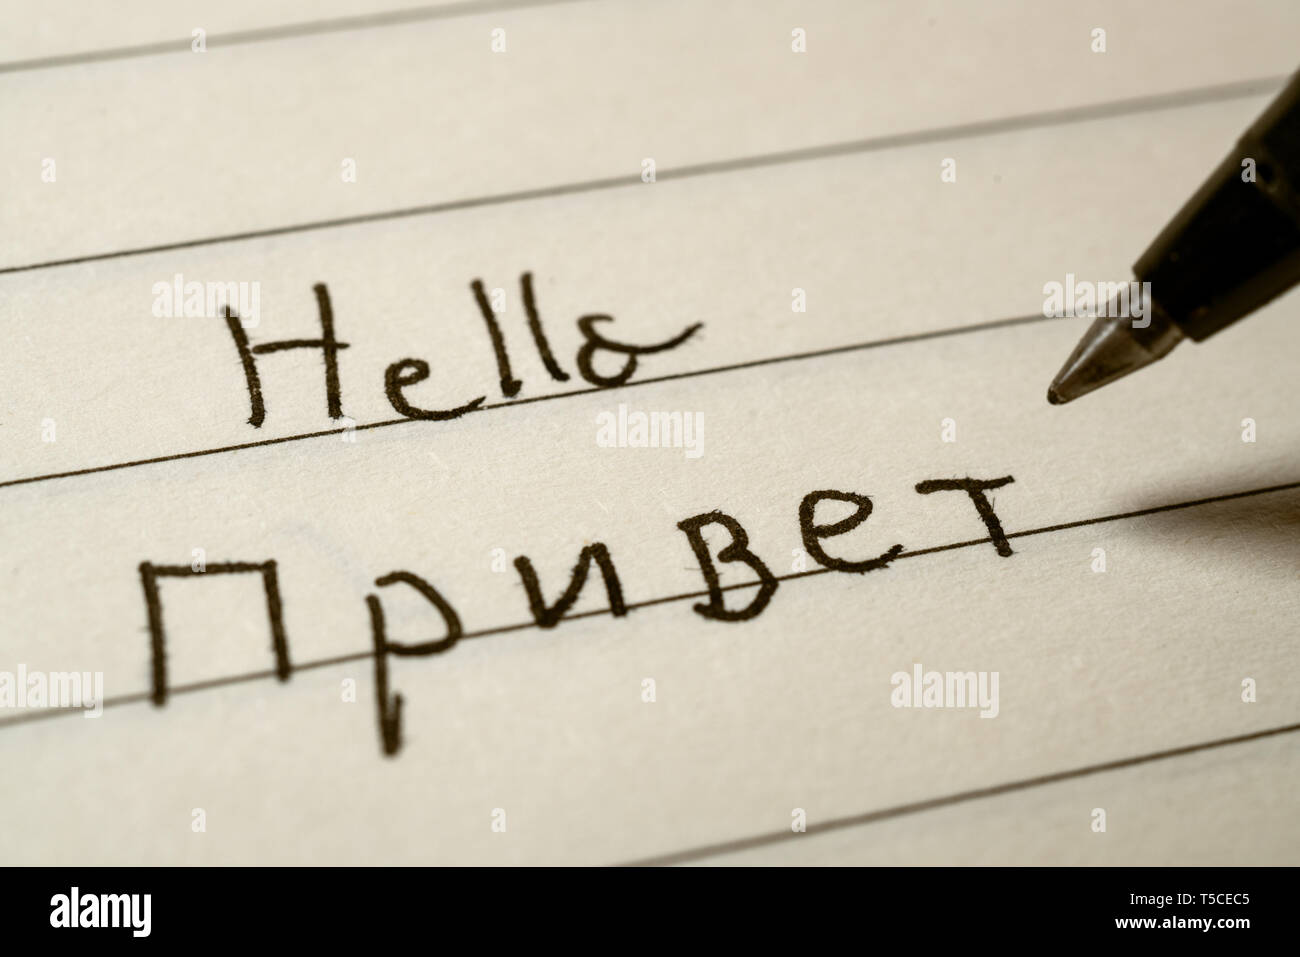 Beginner Russian language learner writing Hello word in Russian cyrillic alphabet on a notebook close-up shot Stock Photo